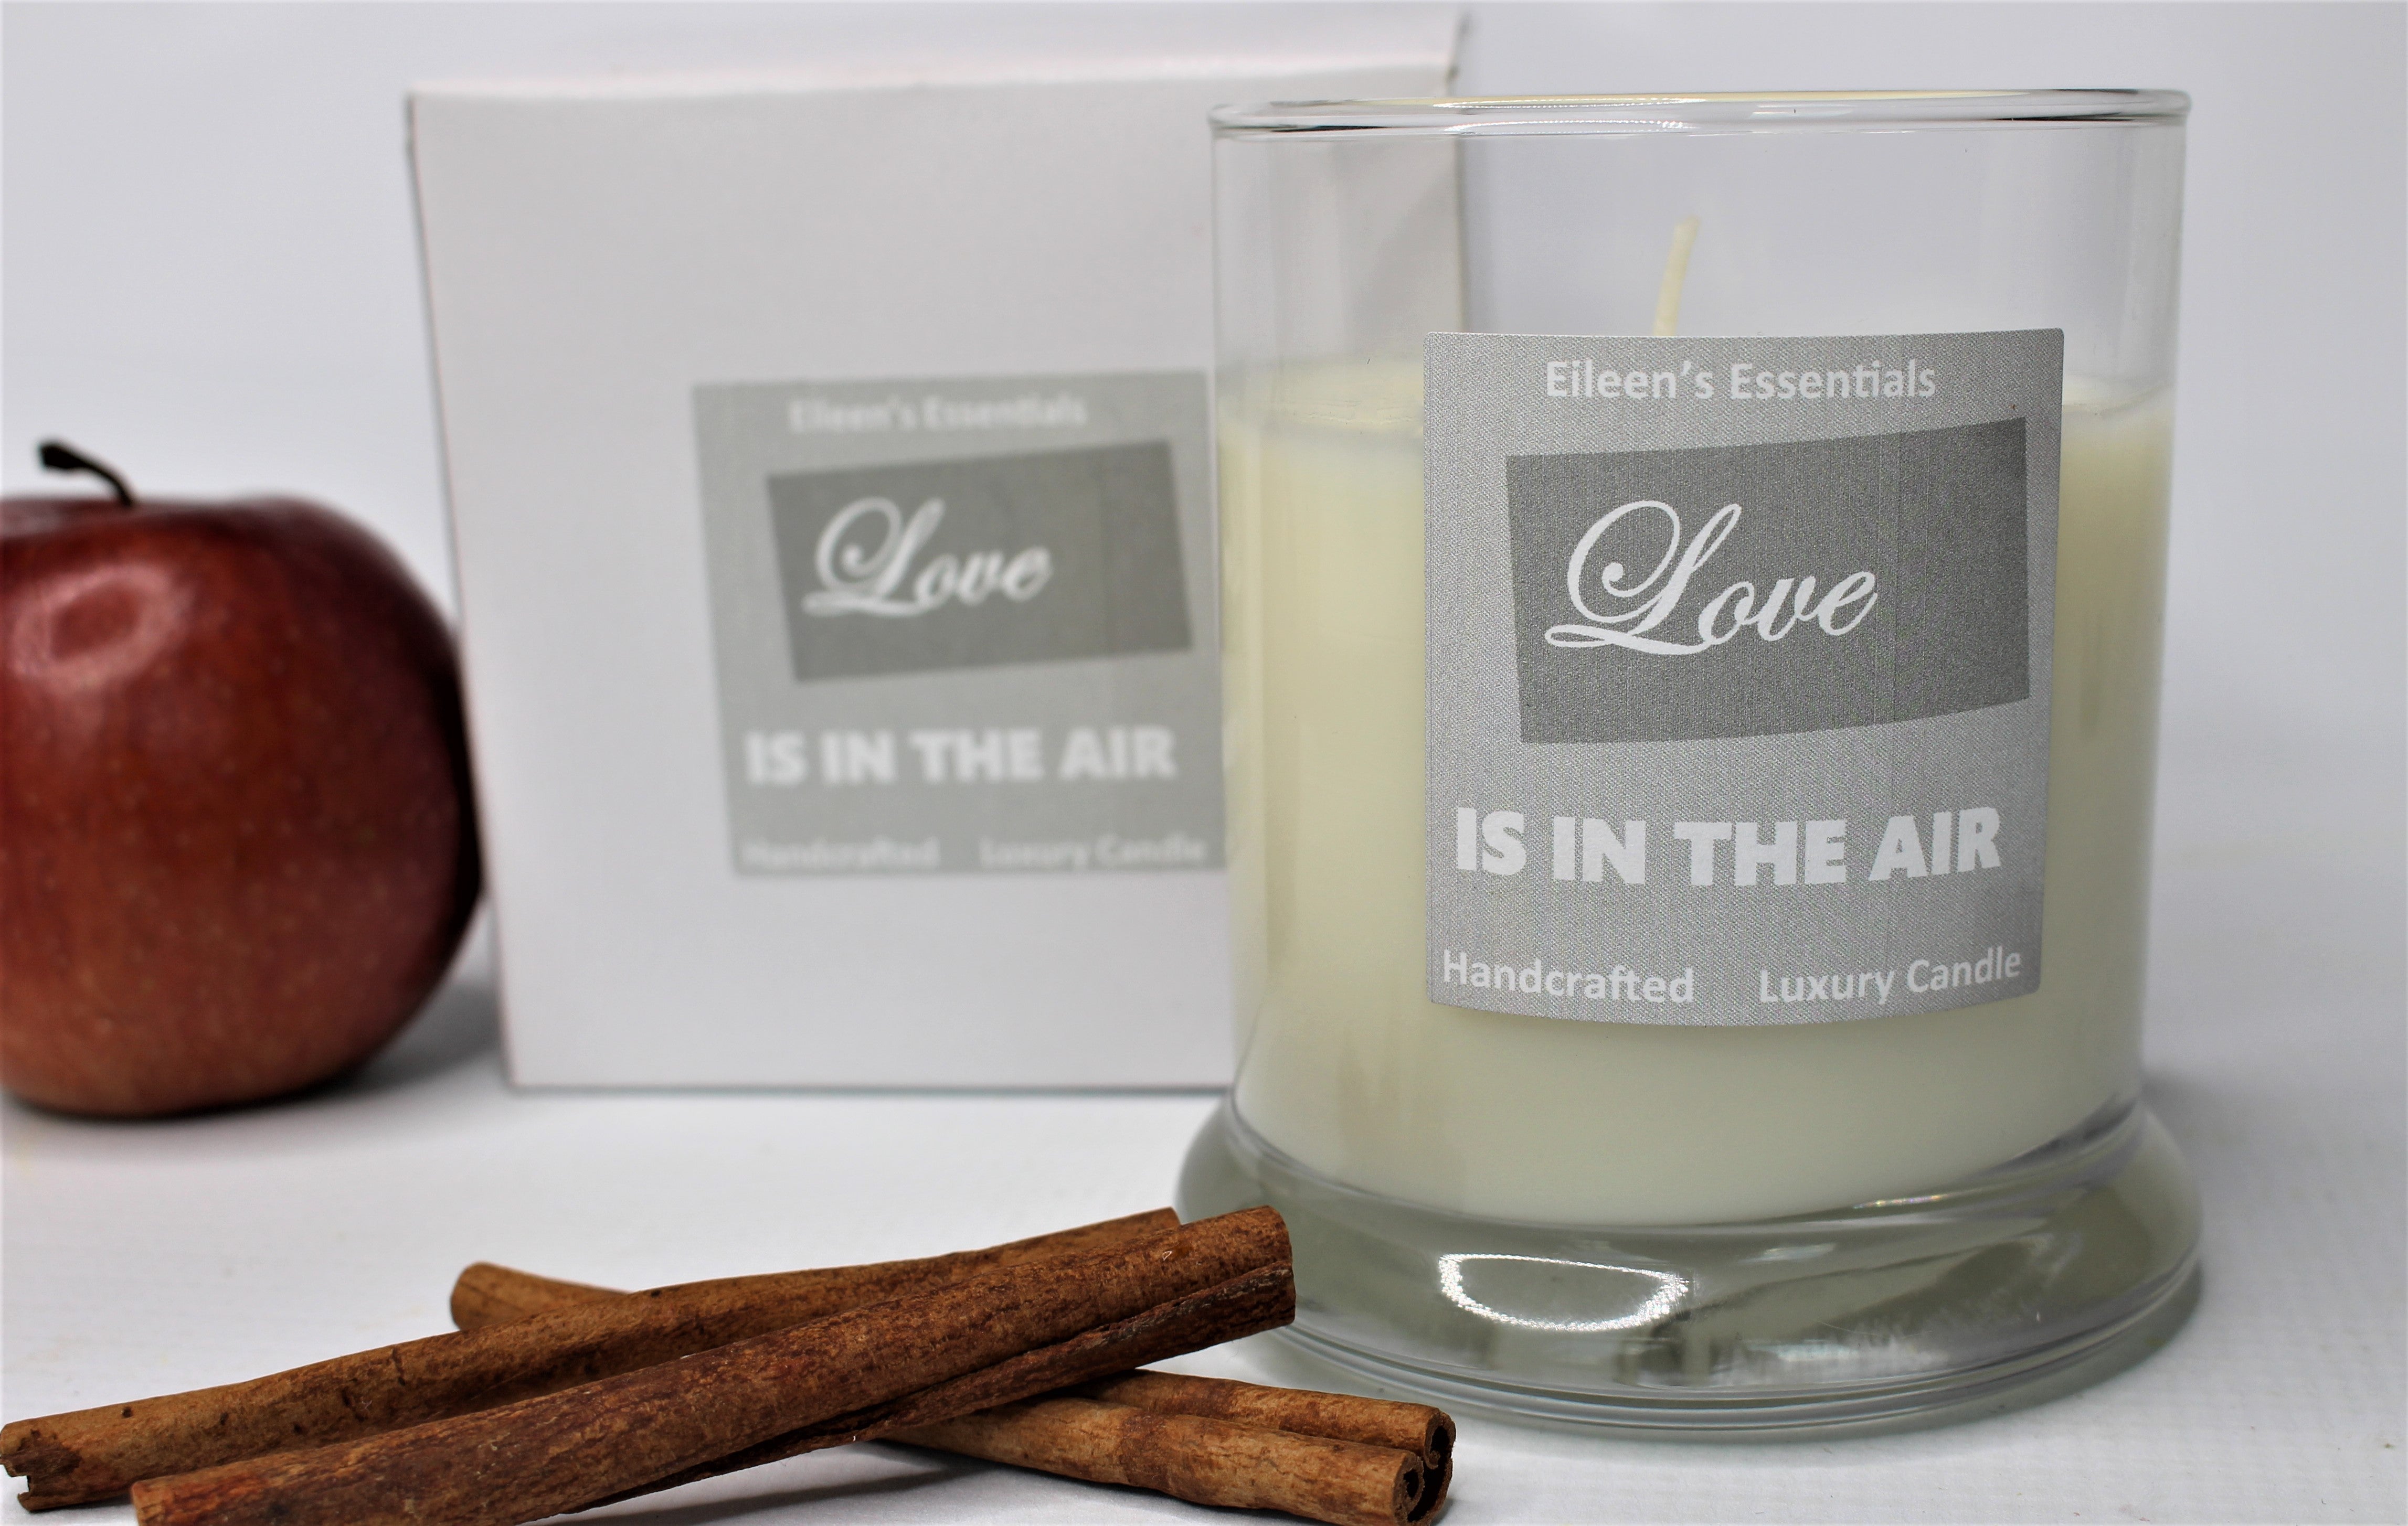 Signature Scent; LOVE IS IN THE AIR - Eileen's Essentials